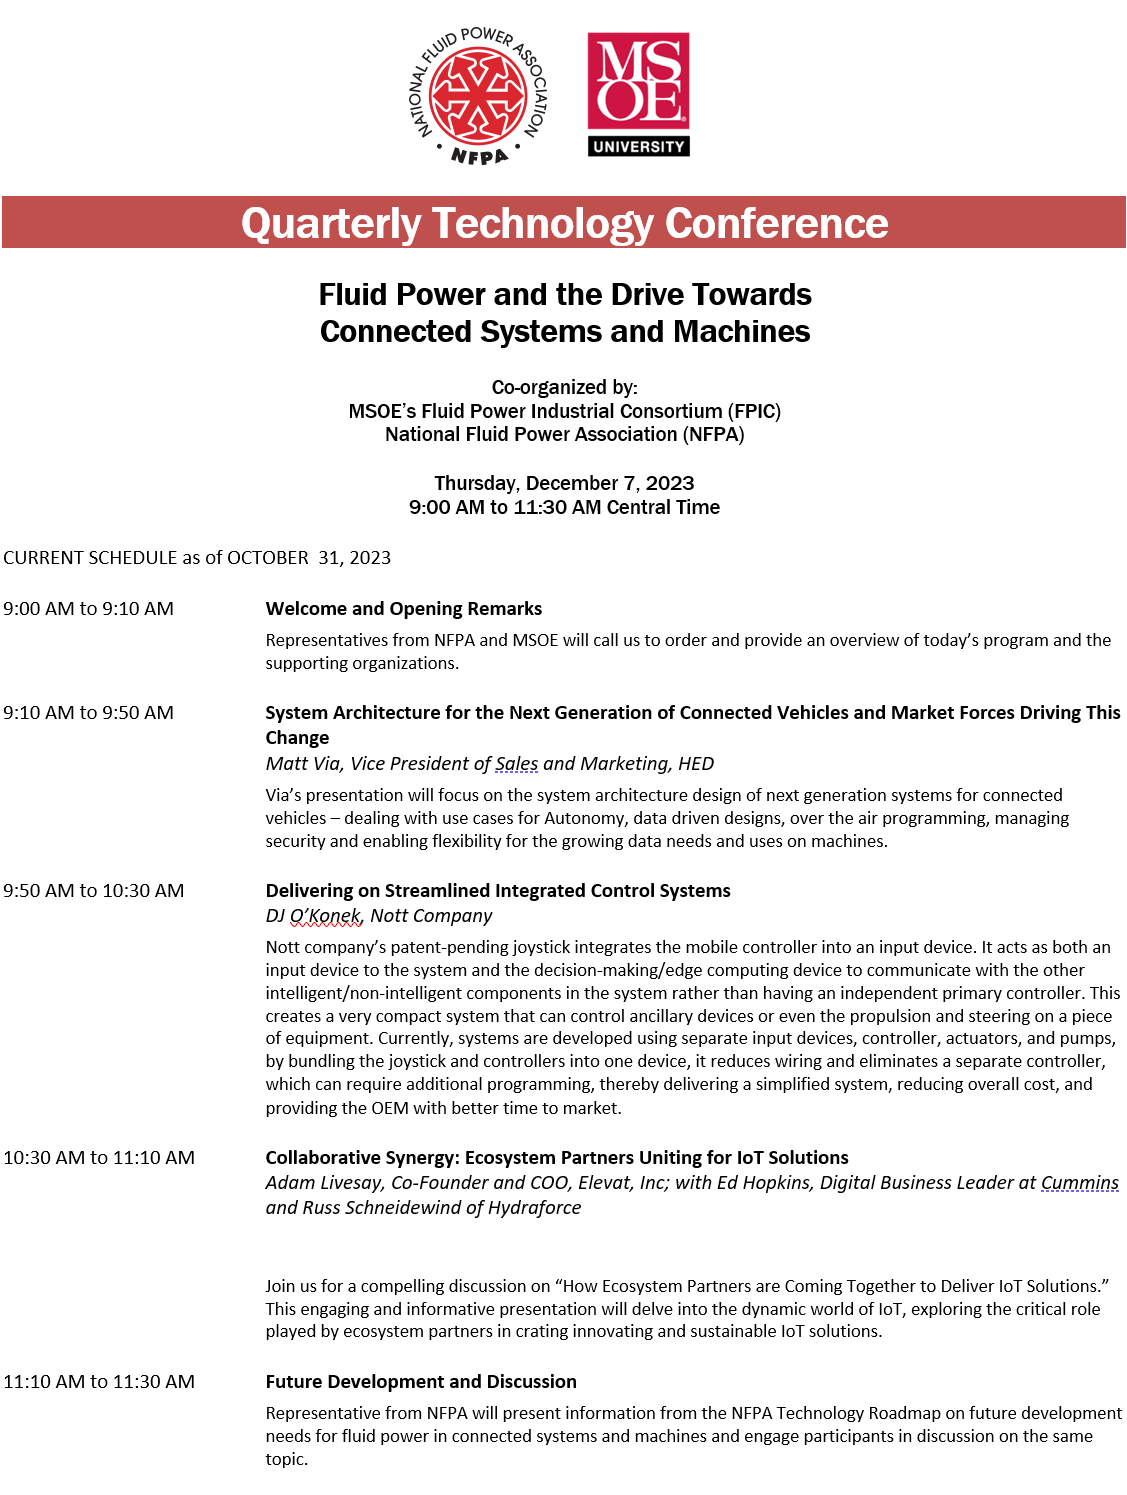 2023-10-31 15_09_26-Dec 7 2023 Quarterly Technology Conference - 2023 09 08 Schedule - Word